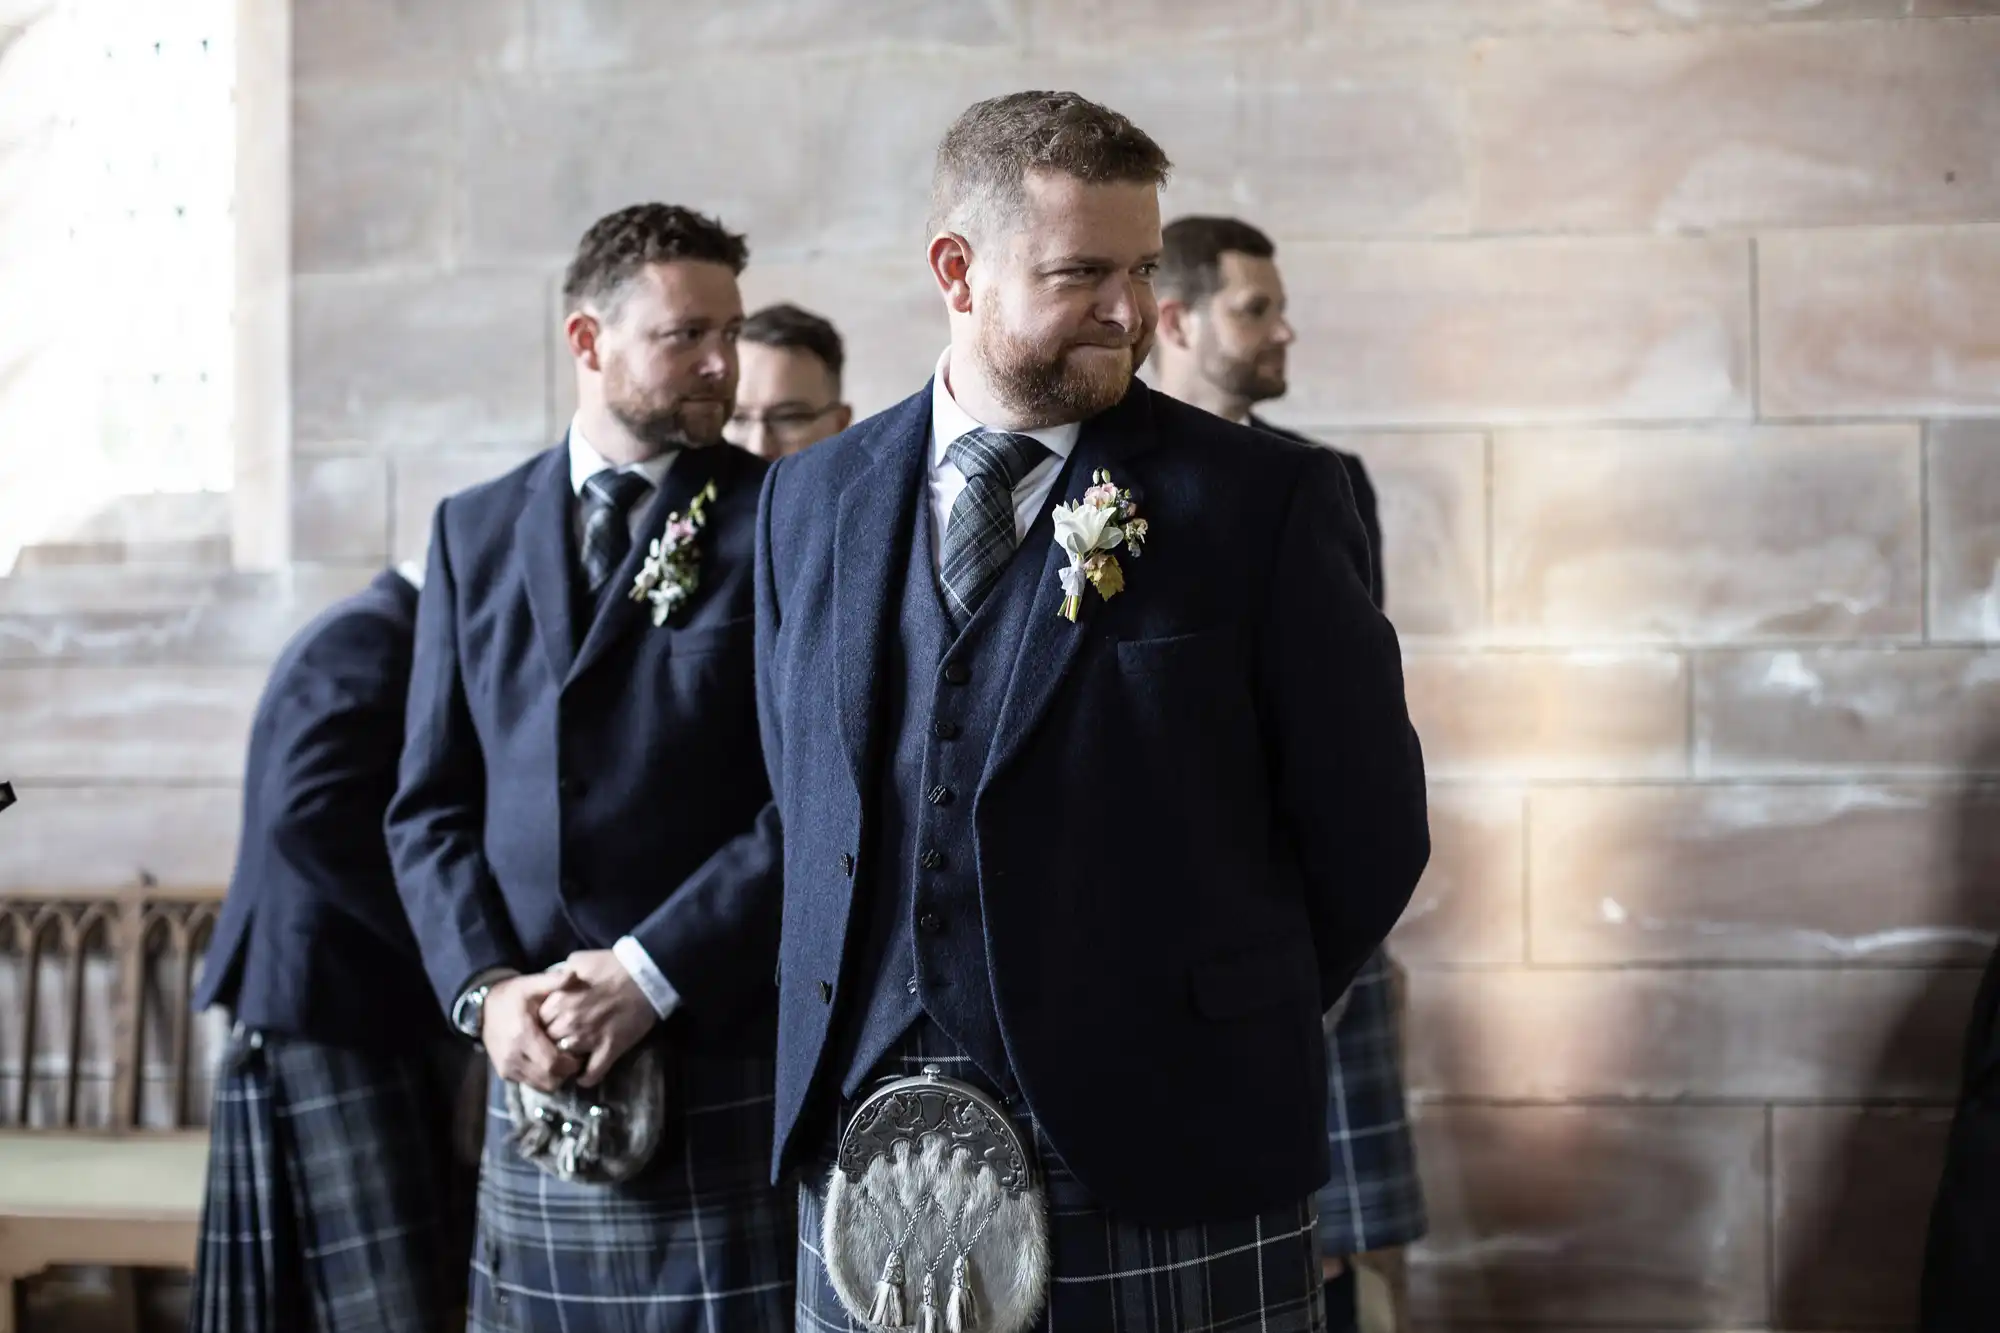 A group of men in traditional Scottish attire, including kilts and jackets, stand solemnly in a room with a stone wall background. One man in the foreground smiles slightly.